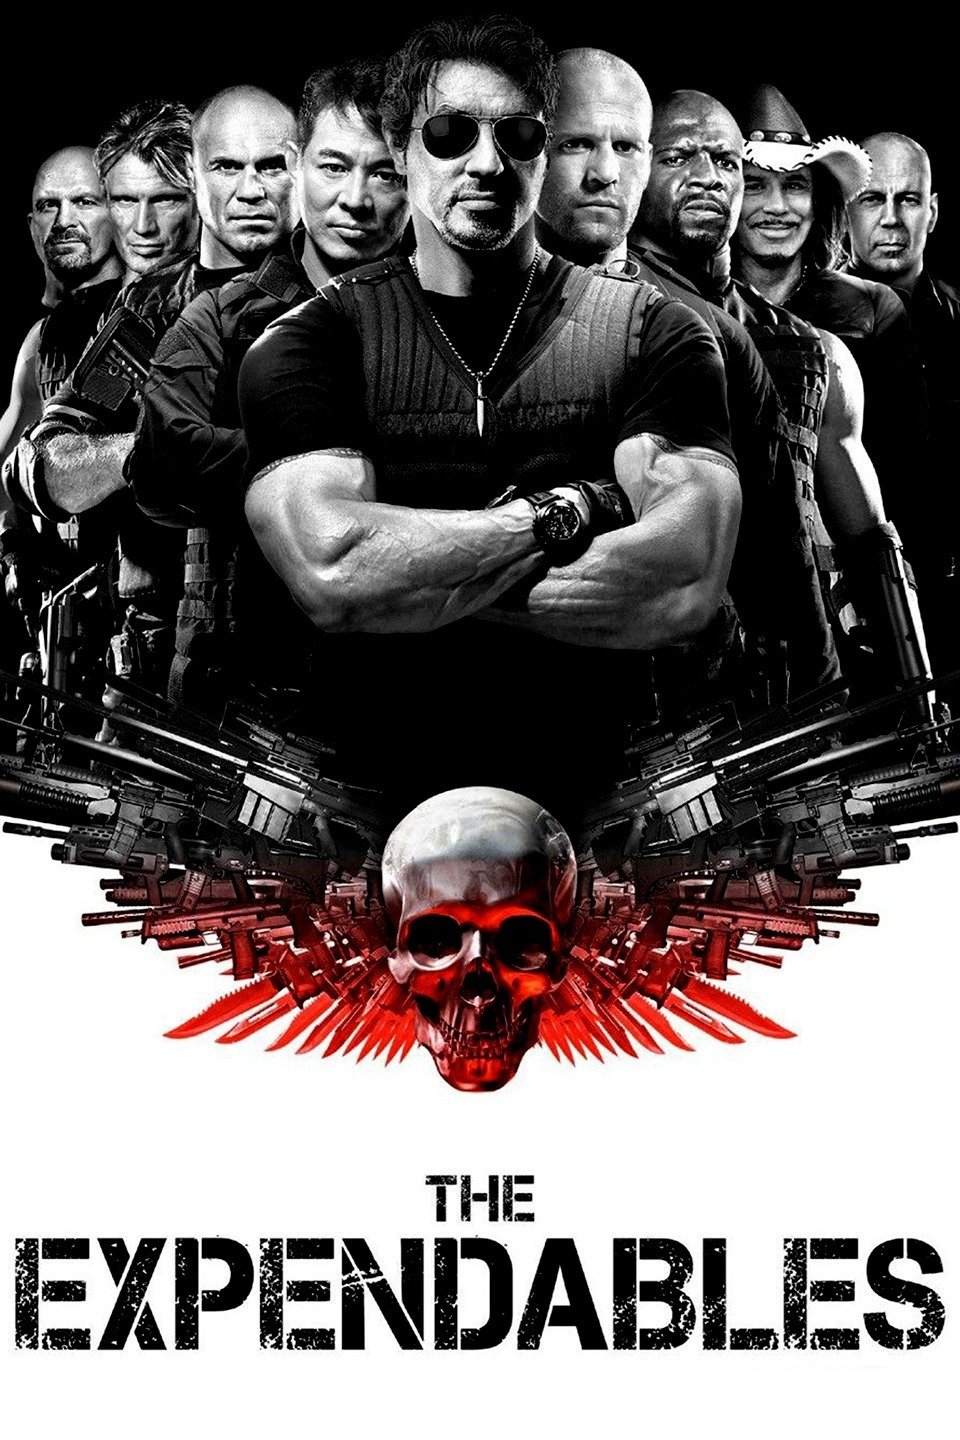 Re: Expendables: Postradatelní / The Expendables (2010)